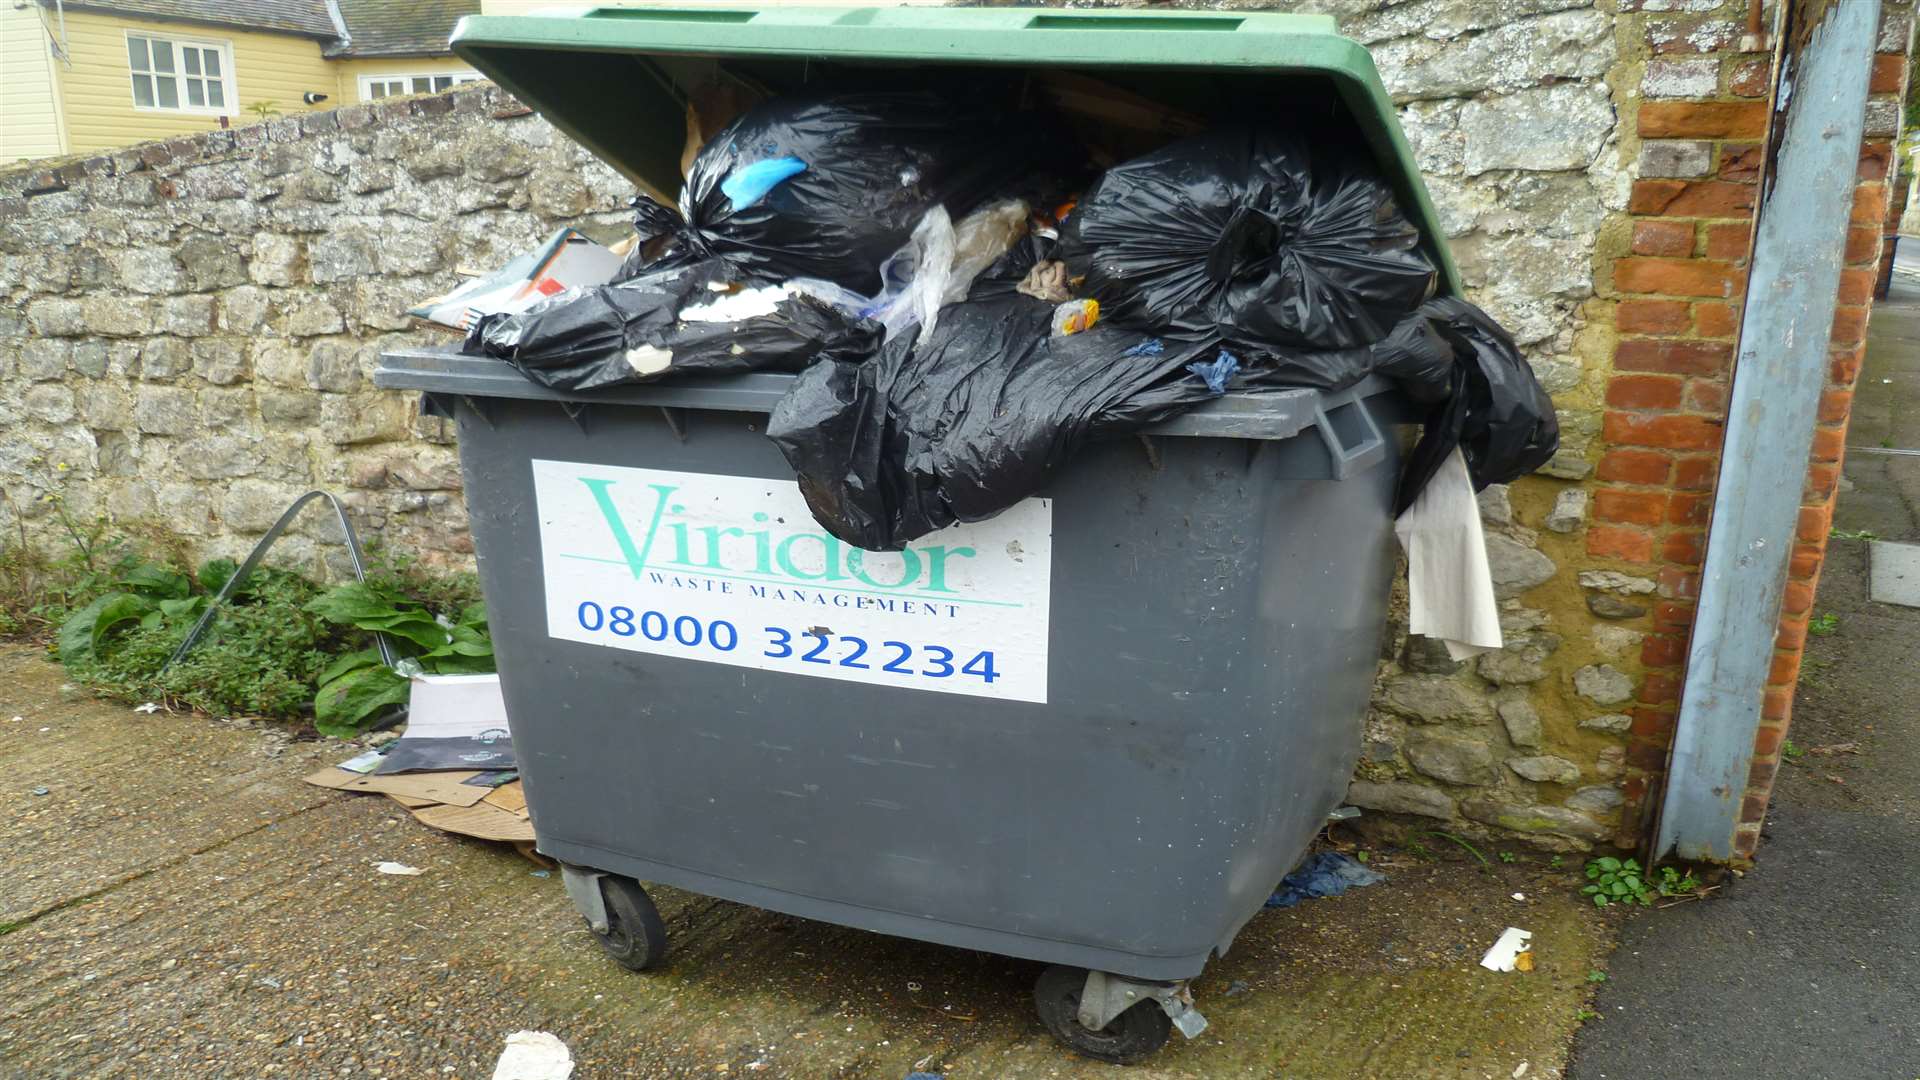 The offending bin belonging to Golden Fish and Chips in Hythe